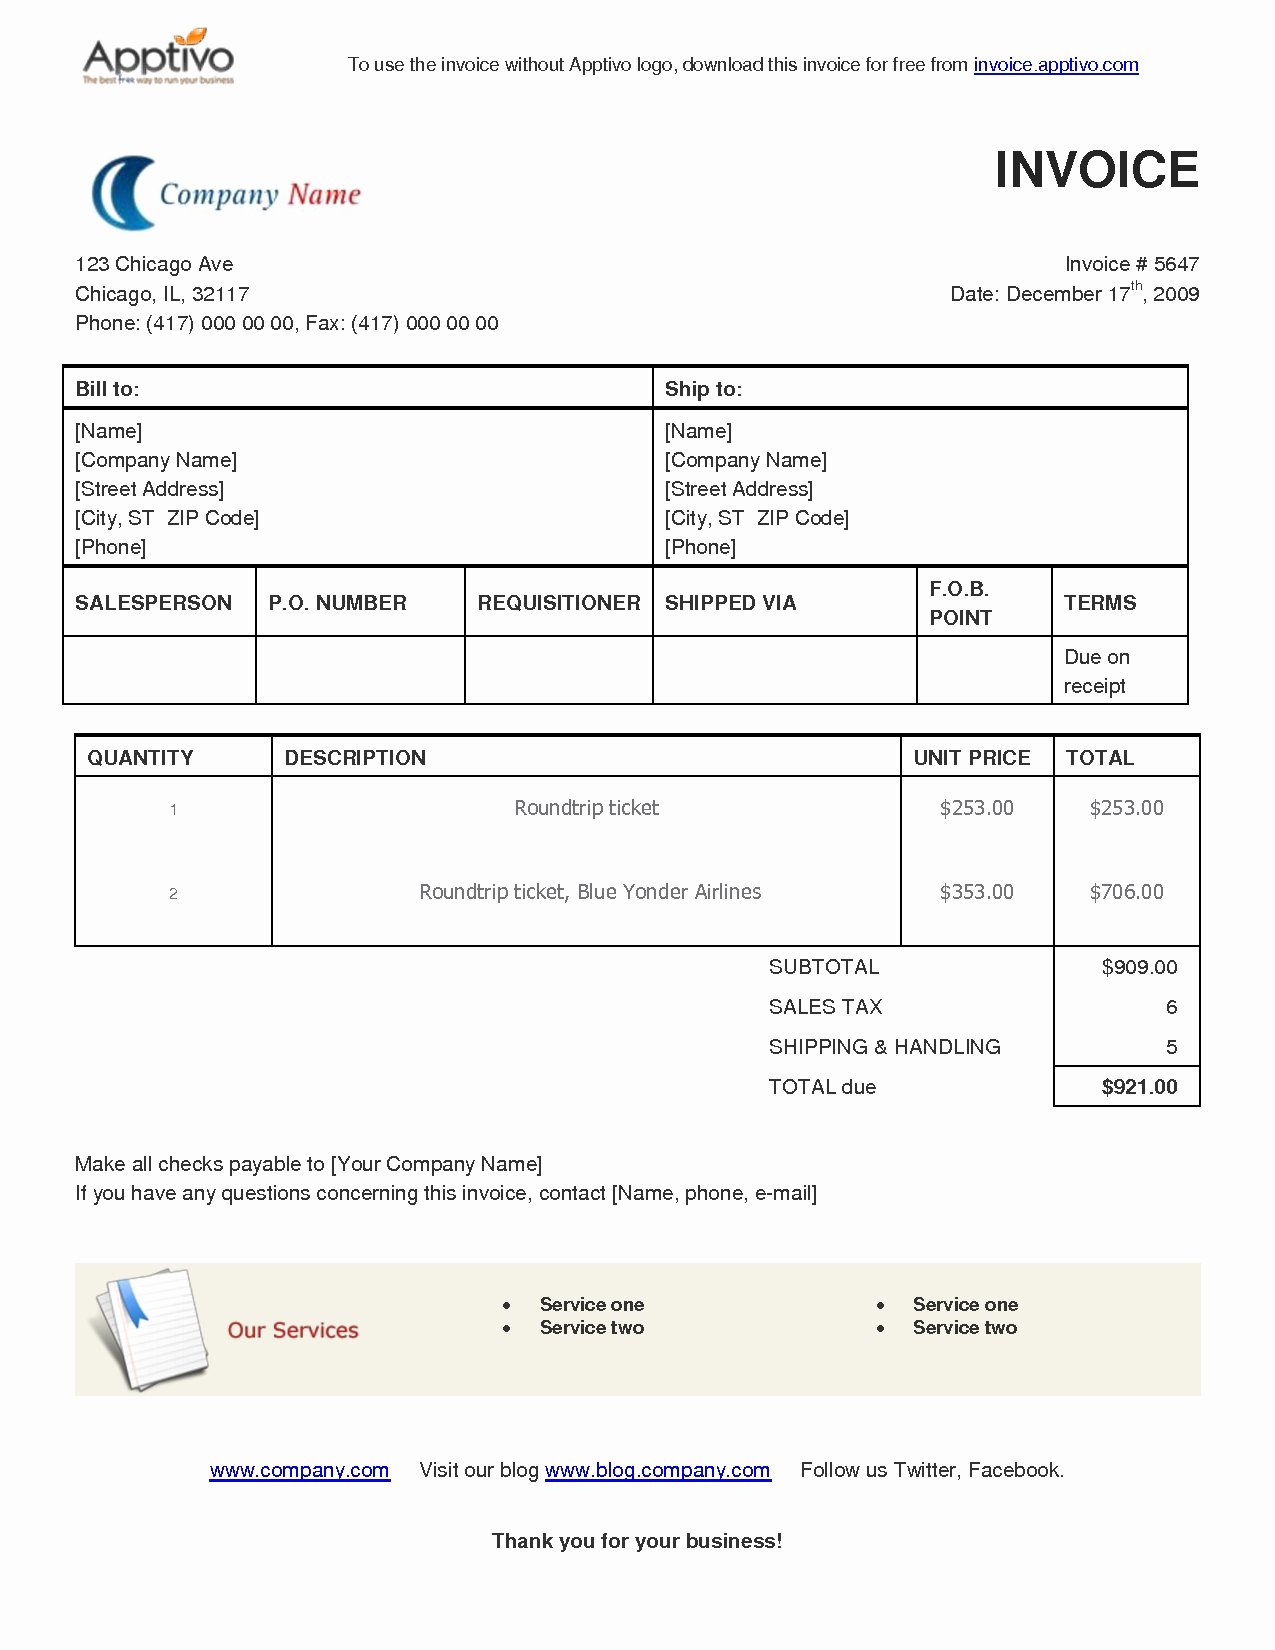 Invoice Template Word 2010 New Blank Invoice Template Microsoft Word Invoice Template Ideas